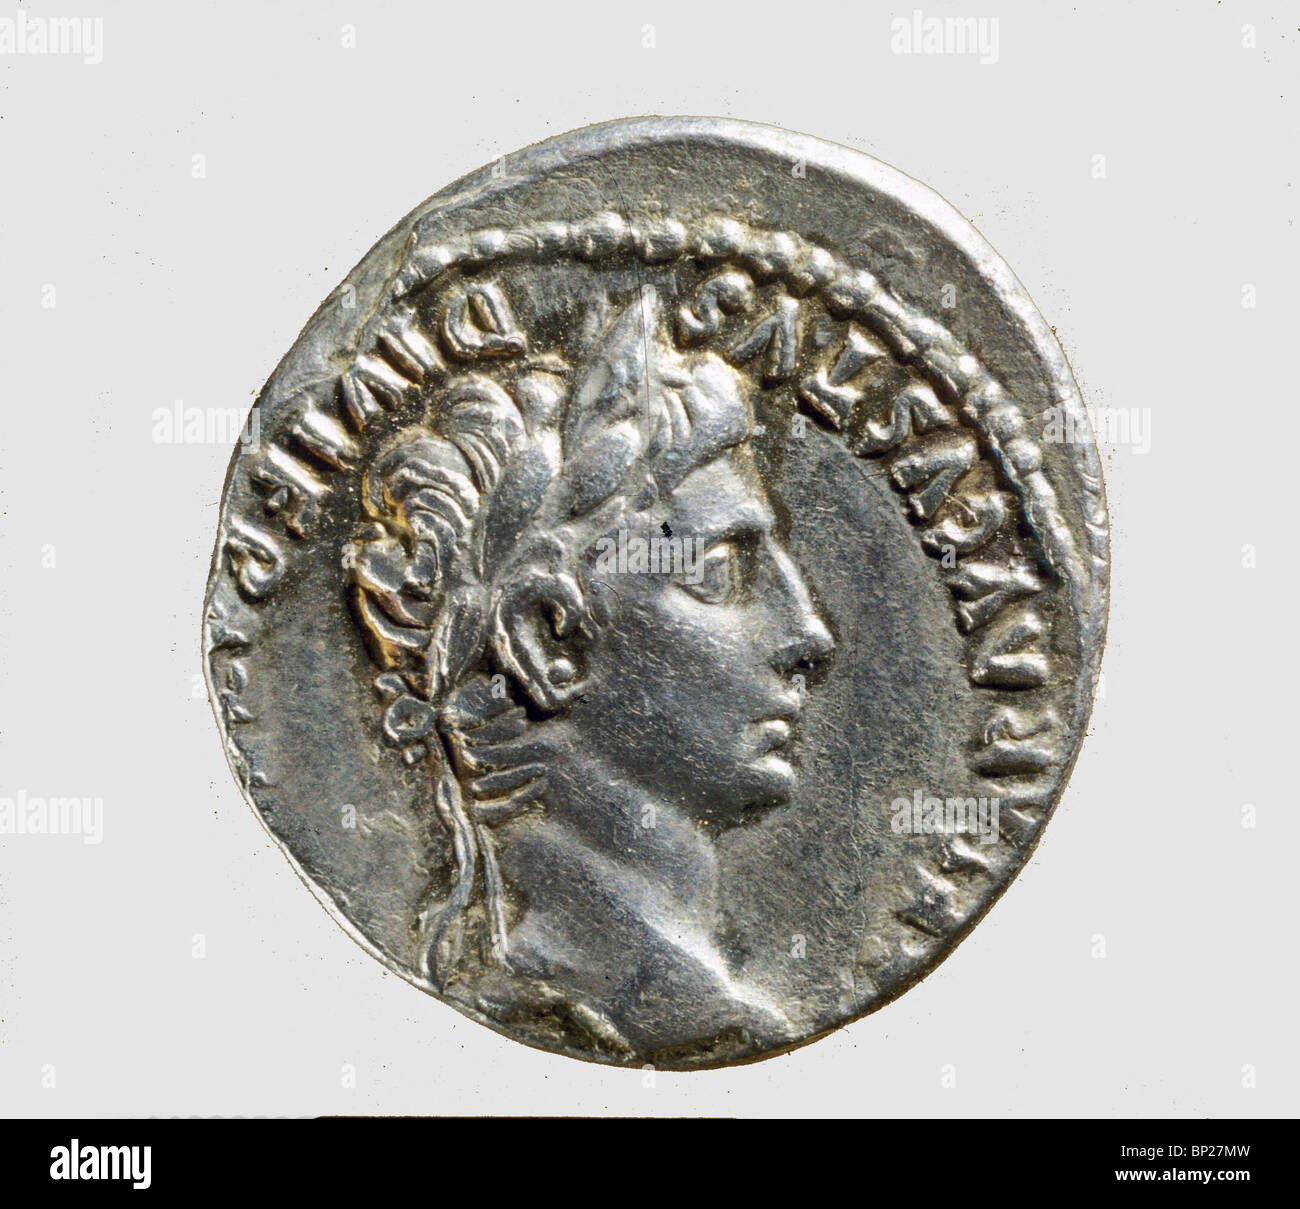 931. ROMAN COIN WITH THE BUST OF EMPEROR AUGUSTUS, (30 BC. - 14 AD.) Stock Photo